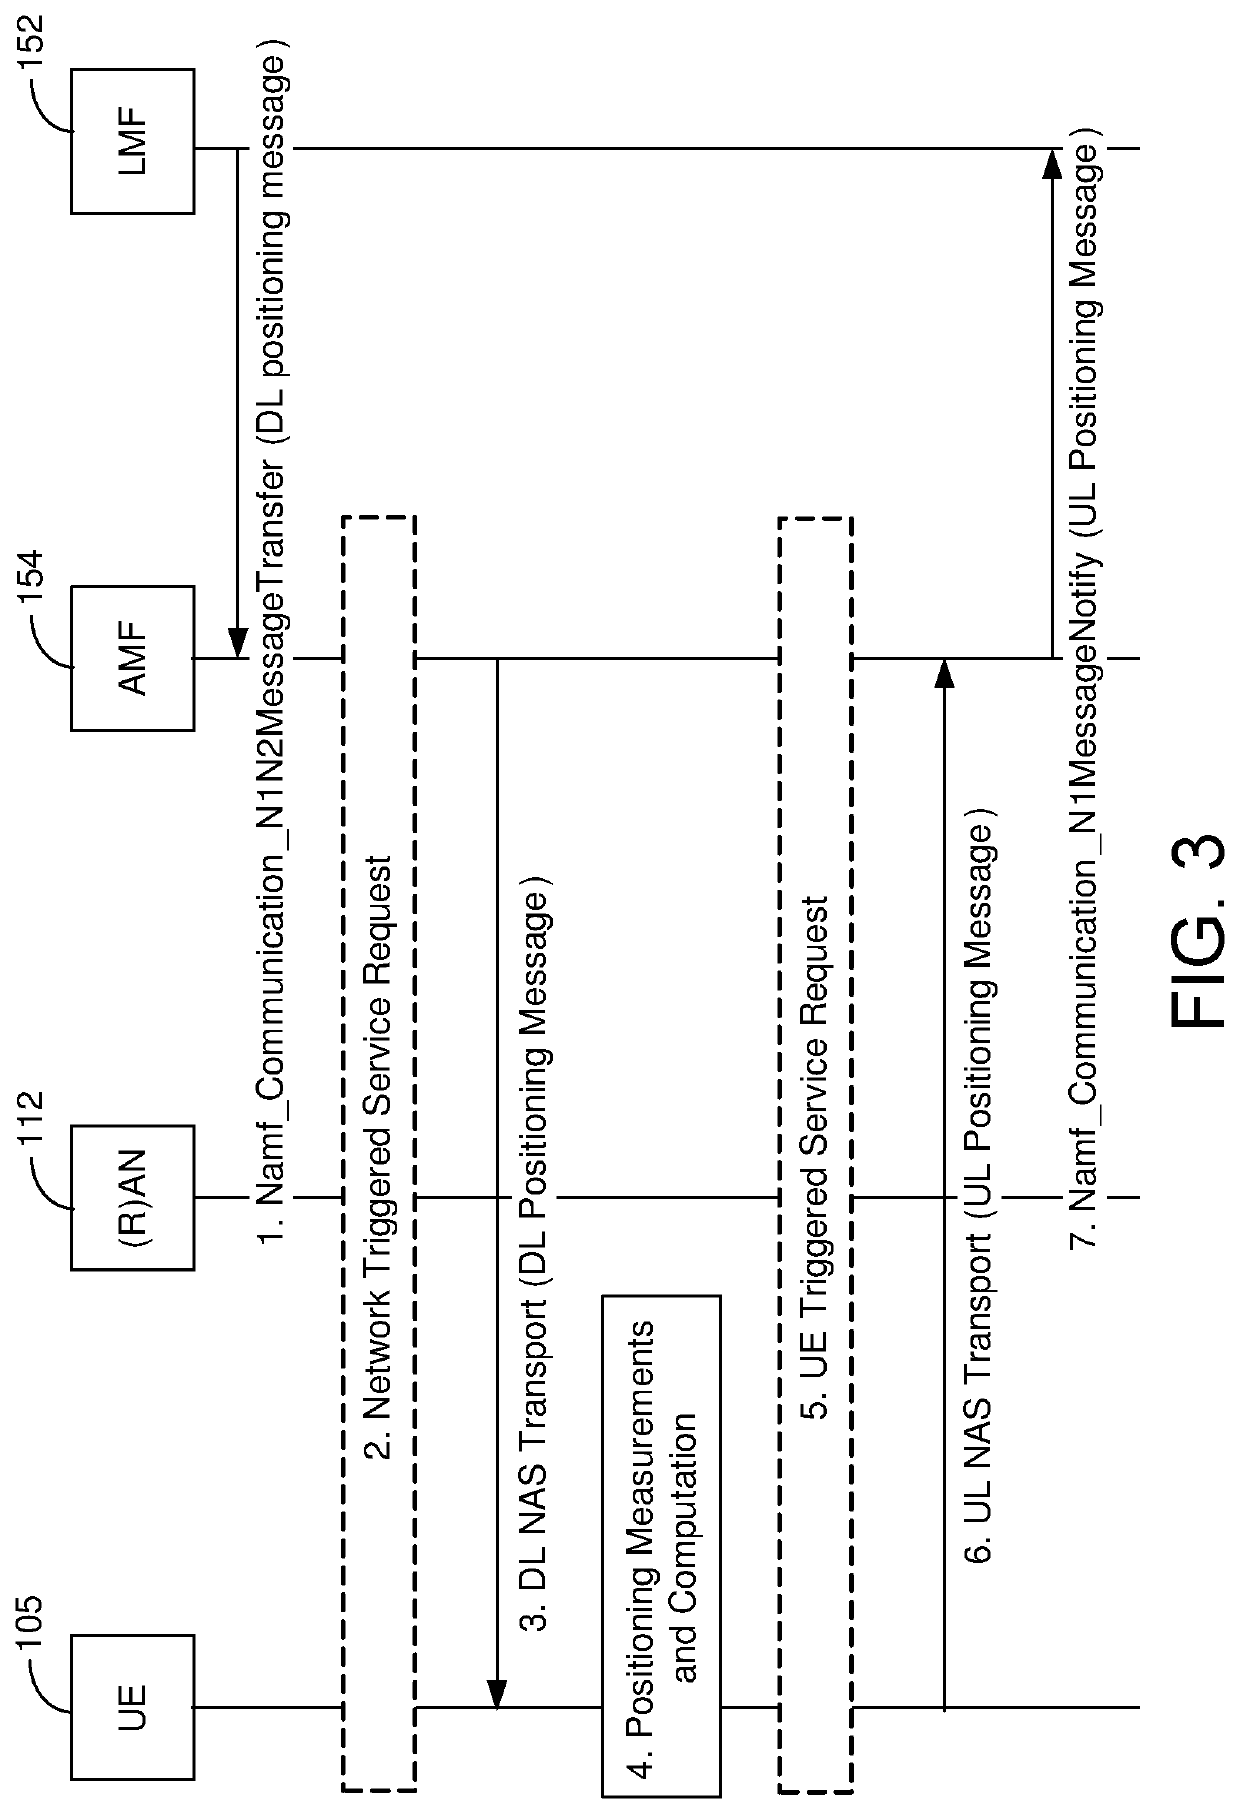 Low power periodic and triggered location of a mobile device using control plane optimization